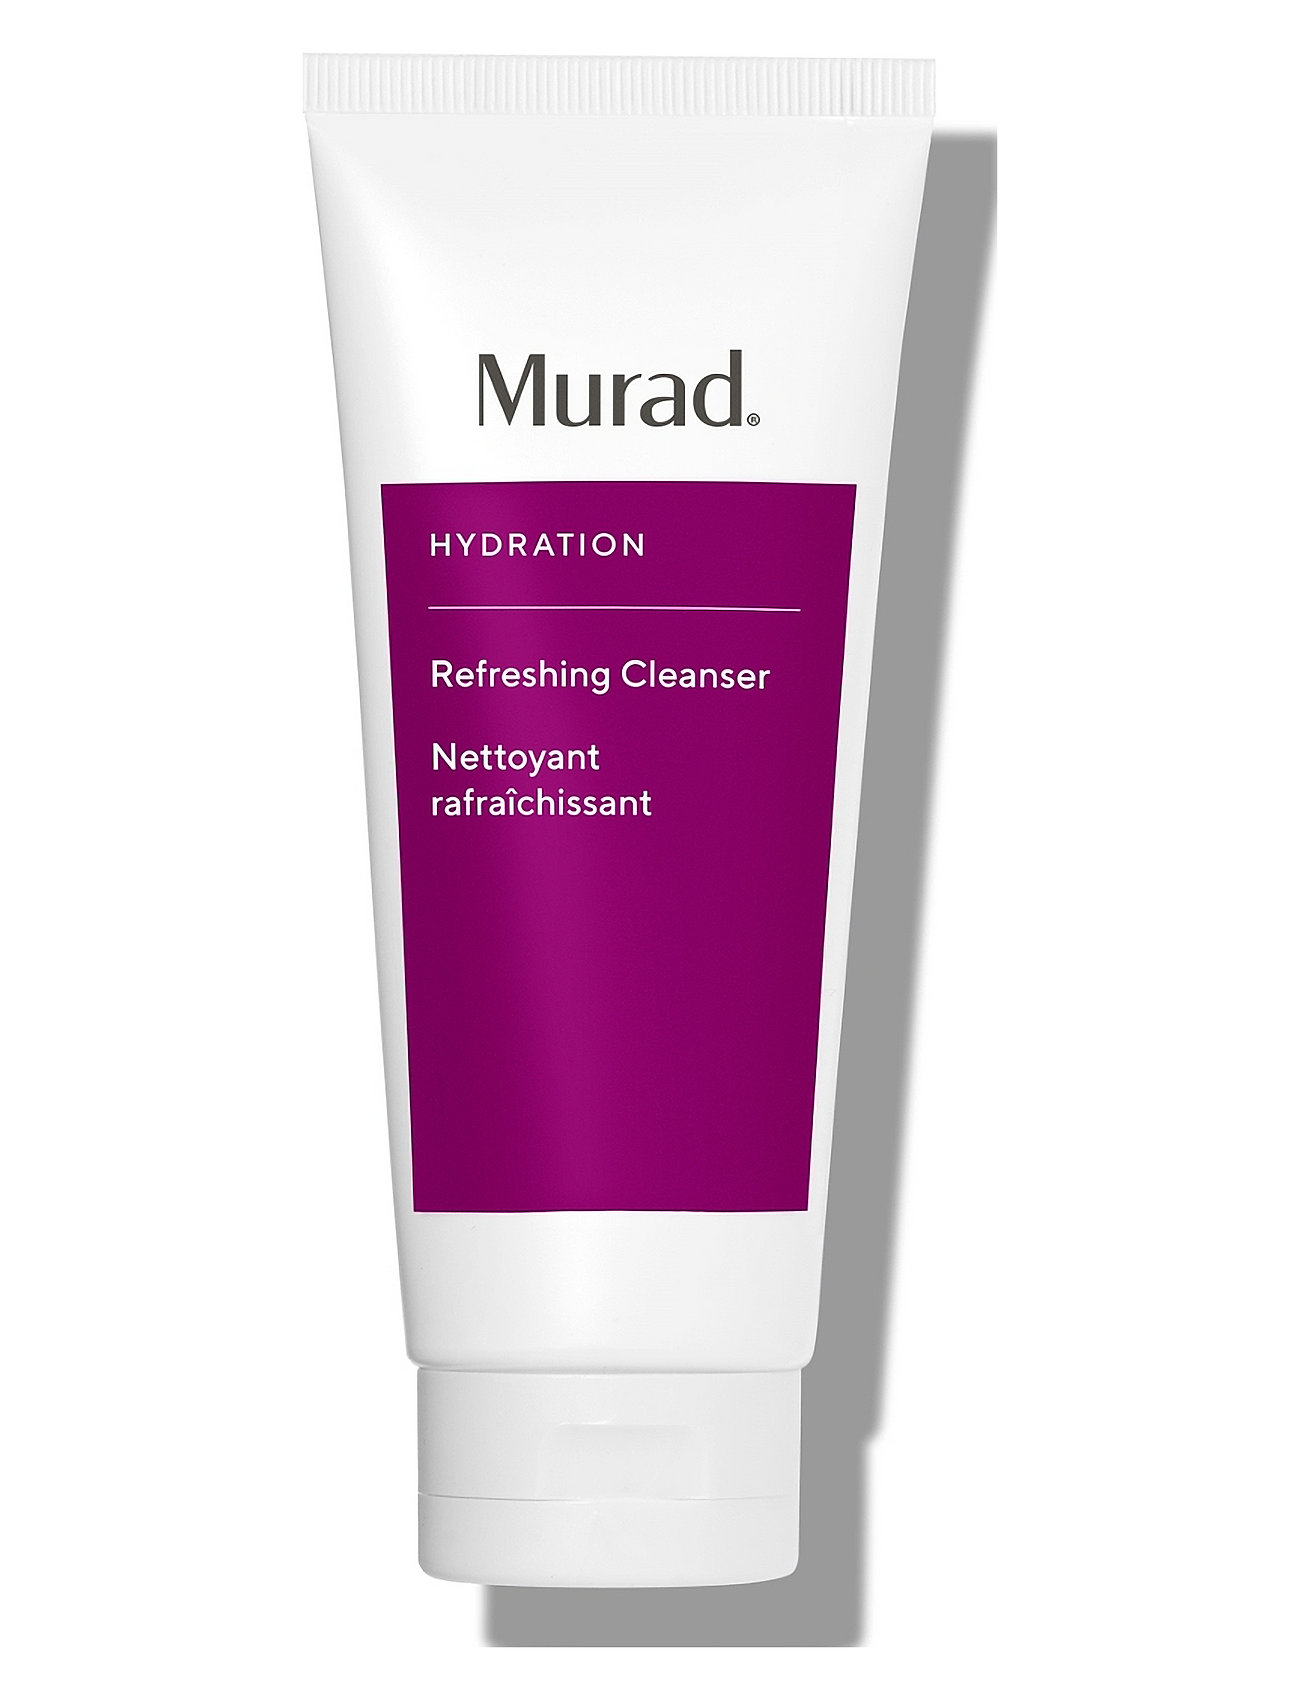 Hydration Refreshing Cleanser Beauty WOMEN Skin Care Face Cleansers Cleansing Gel Nude Murad